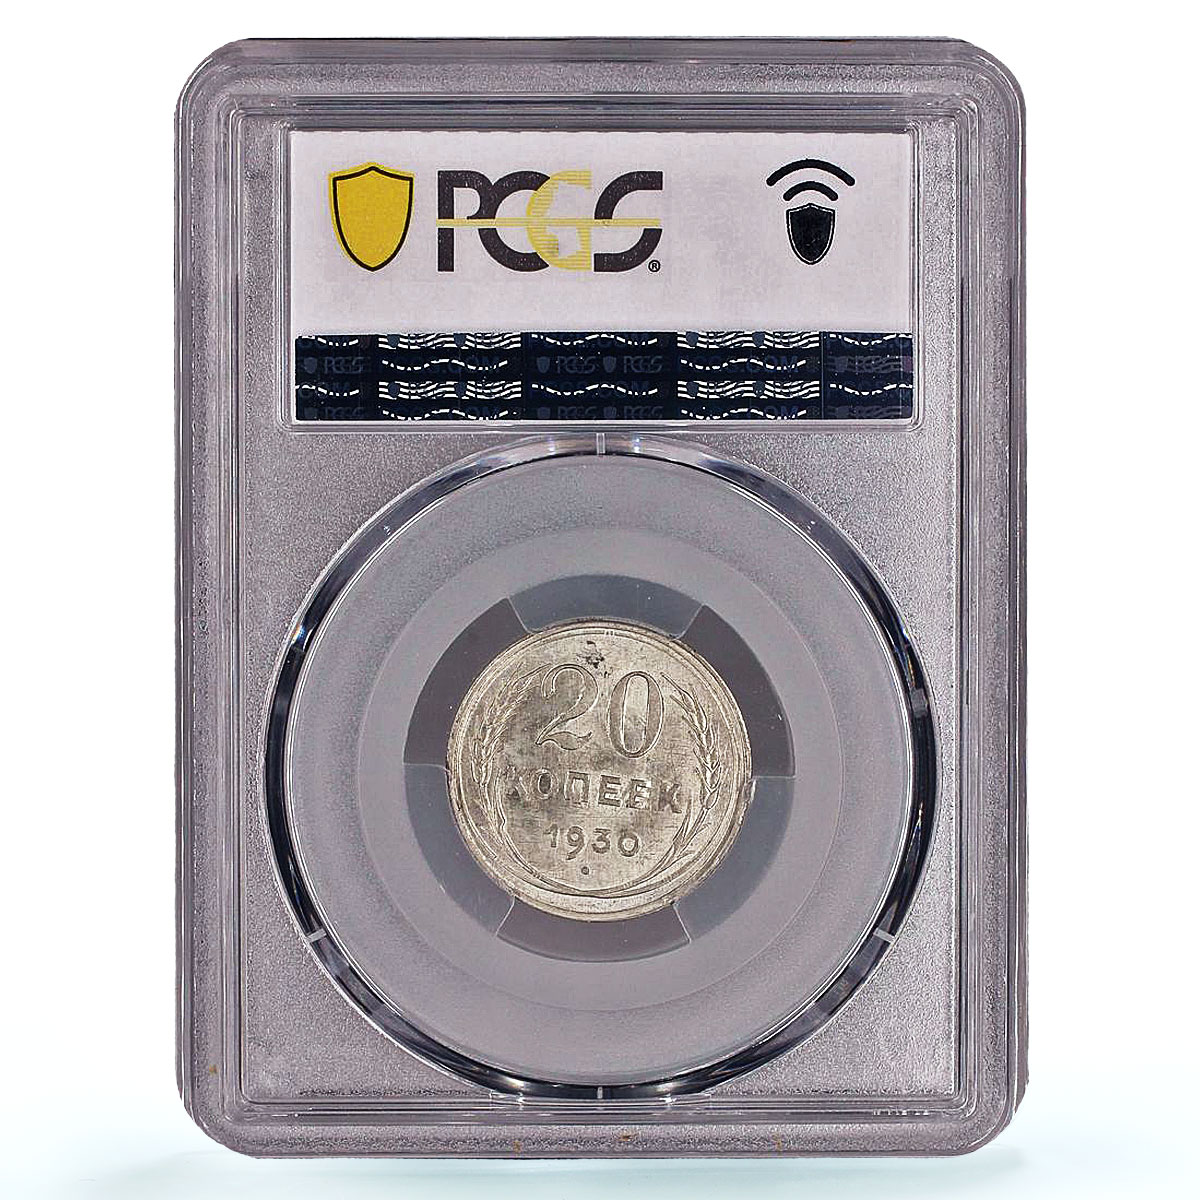 Russia USSR RSFSR 20 kopecks Regular Coinage Y-88 MS64 PCGS silver coin 1930